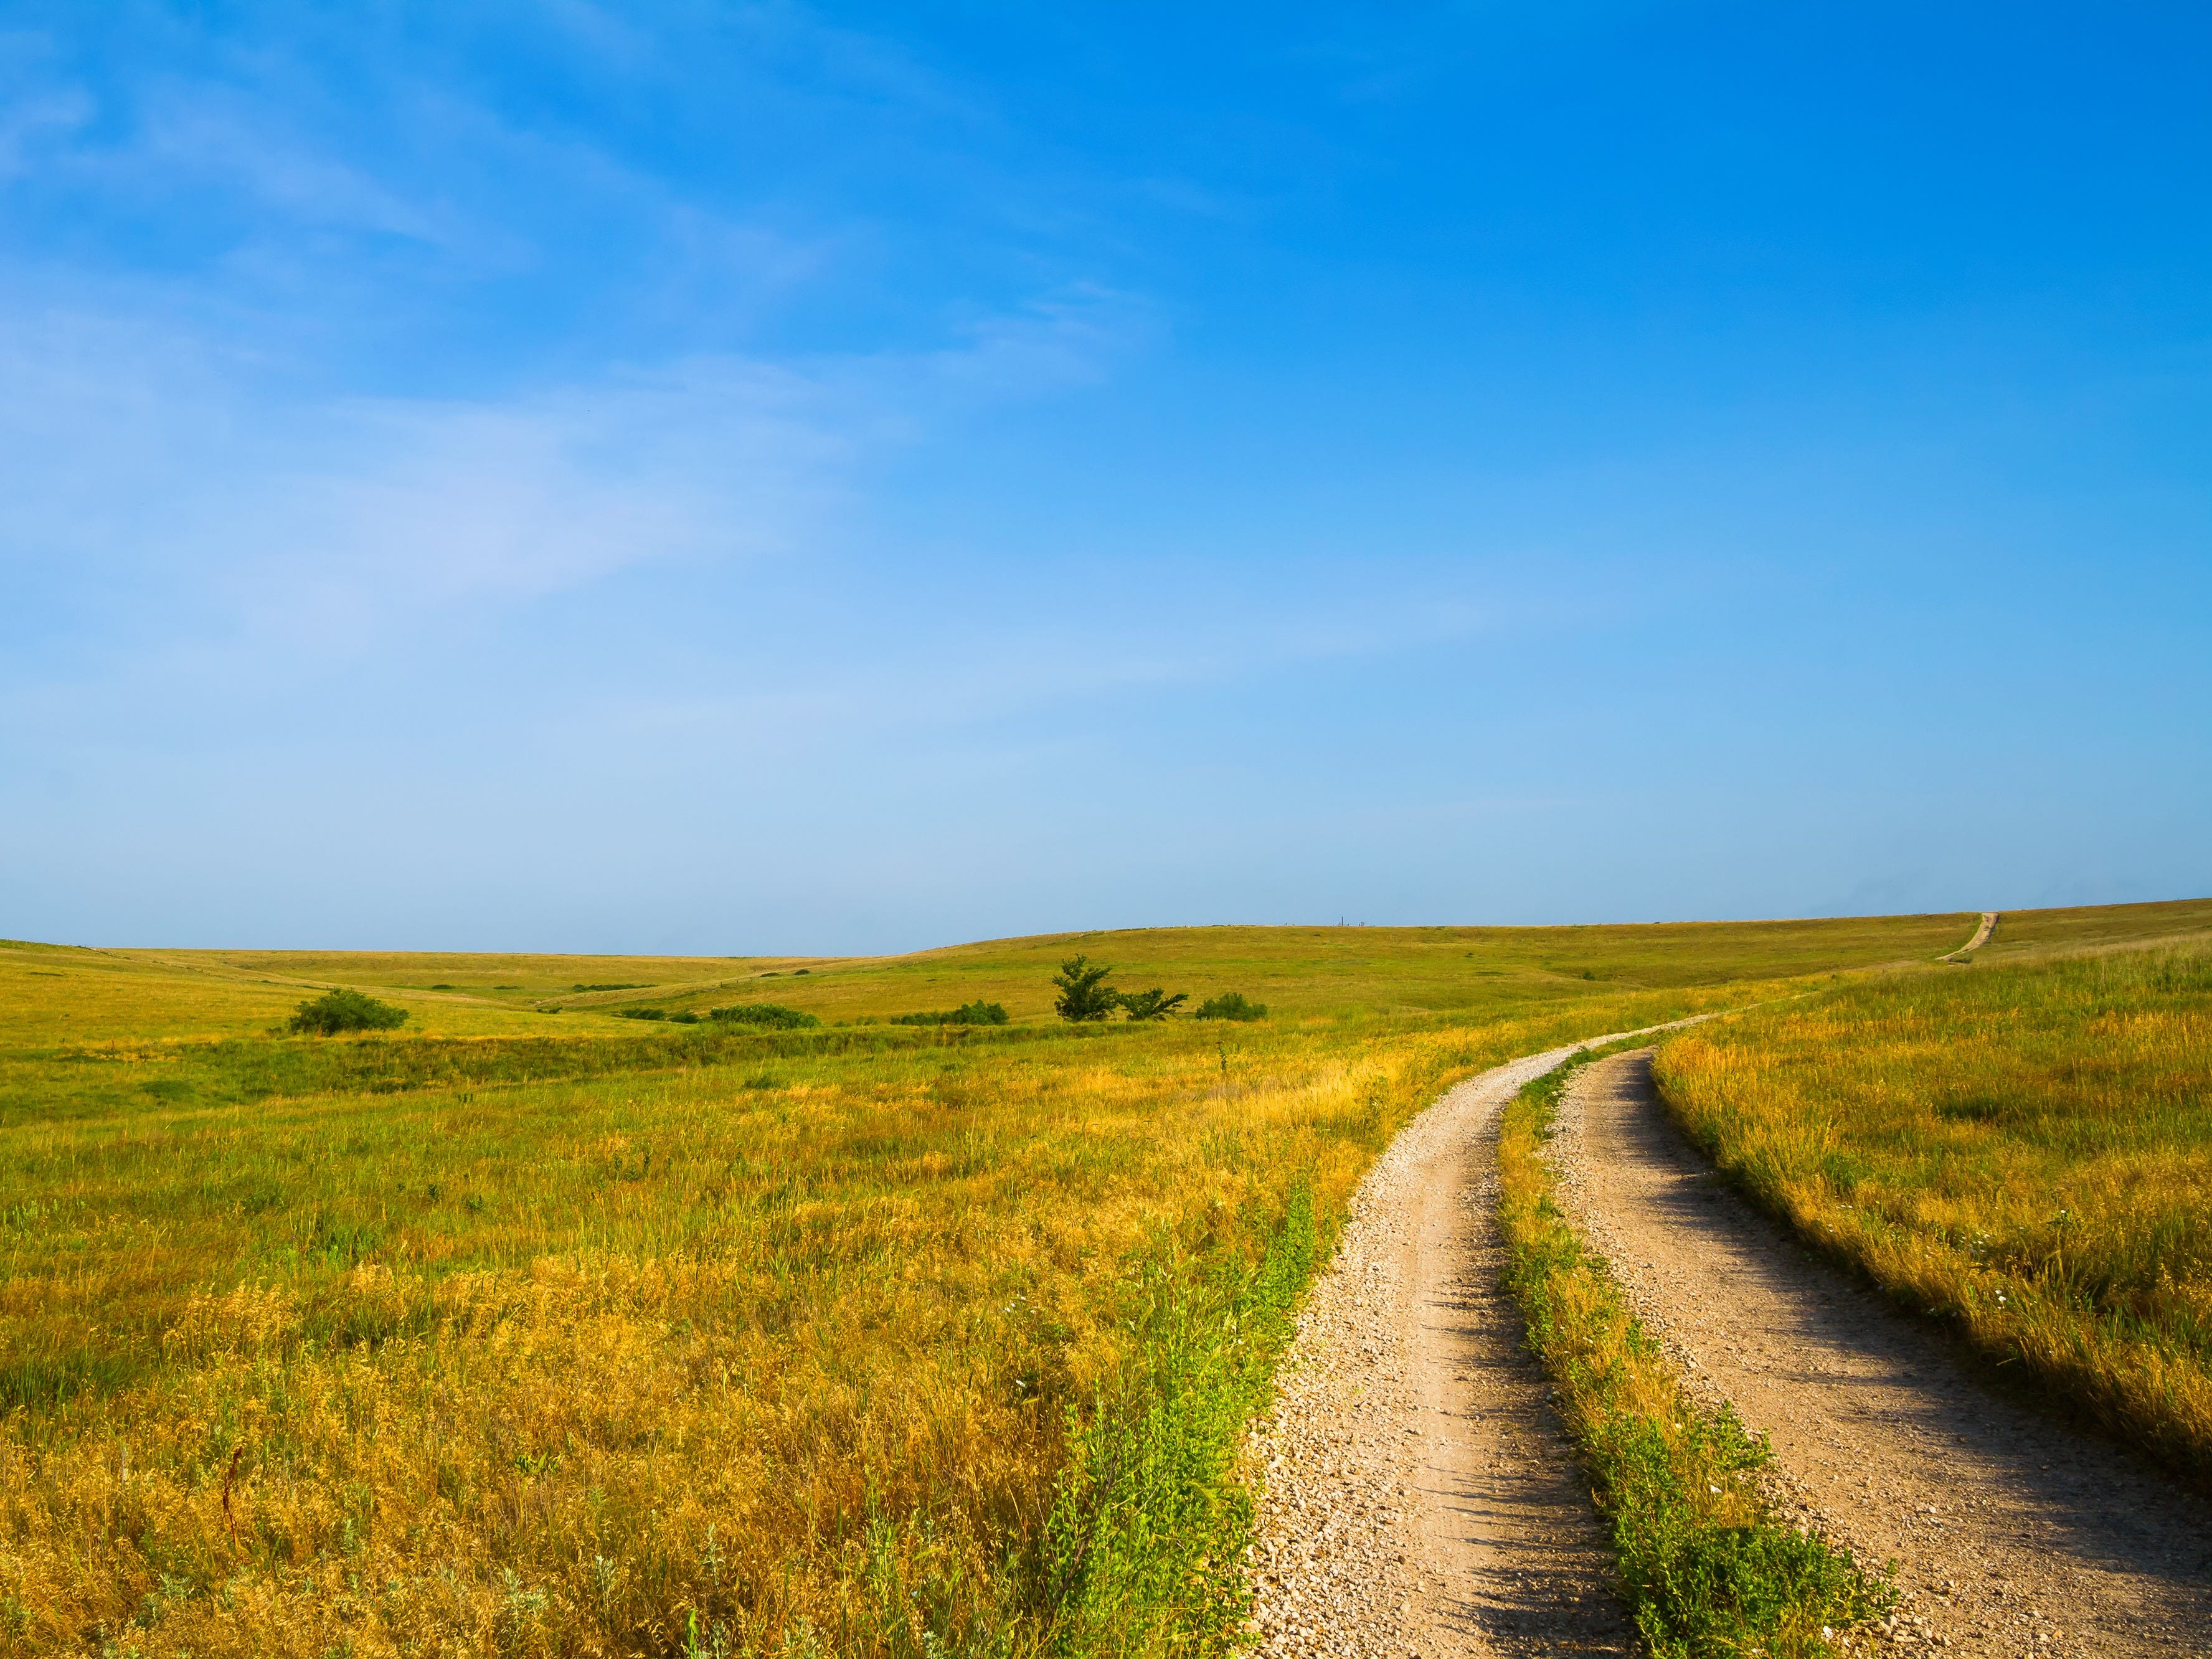 <p>From picturesque prairies to fresh farmland, the <a href="https://kanzatrails.org/flint-hills-nature-trail/">Flint Hills Trail</a> offers a wide array of landscapes. It's also the longest and most diverse trail in Kansas, according to <a href="https://www.kansas.com/news/state/article152968244.html">The Wichita Eagle</a>.</p><p>Although the flat landscape makes it a pretty easy hike, you can still challenge yourself by hiking all <a href="https://kanzatrails.org/flint-hills-nature-trail/#:~:text=The%20Flint%20Hills%20Trail%20stretches,%2C%20Bushong%2C%20and%20Council%20Grove.">117 miles</a> of it — which usually takes about eight or nine days to complete.</p>